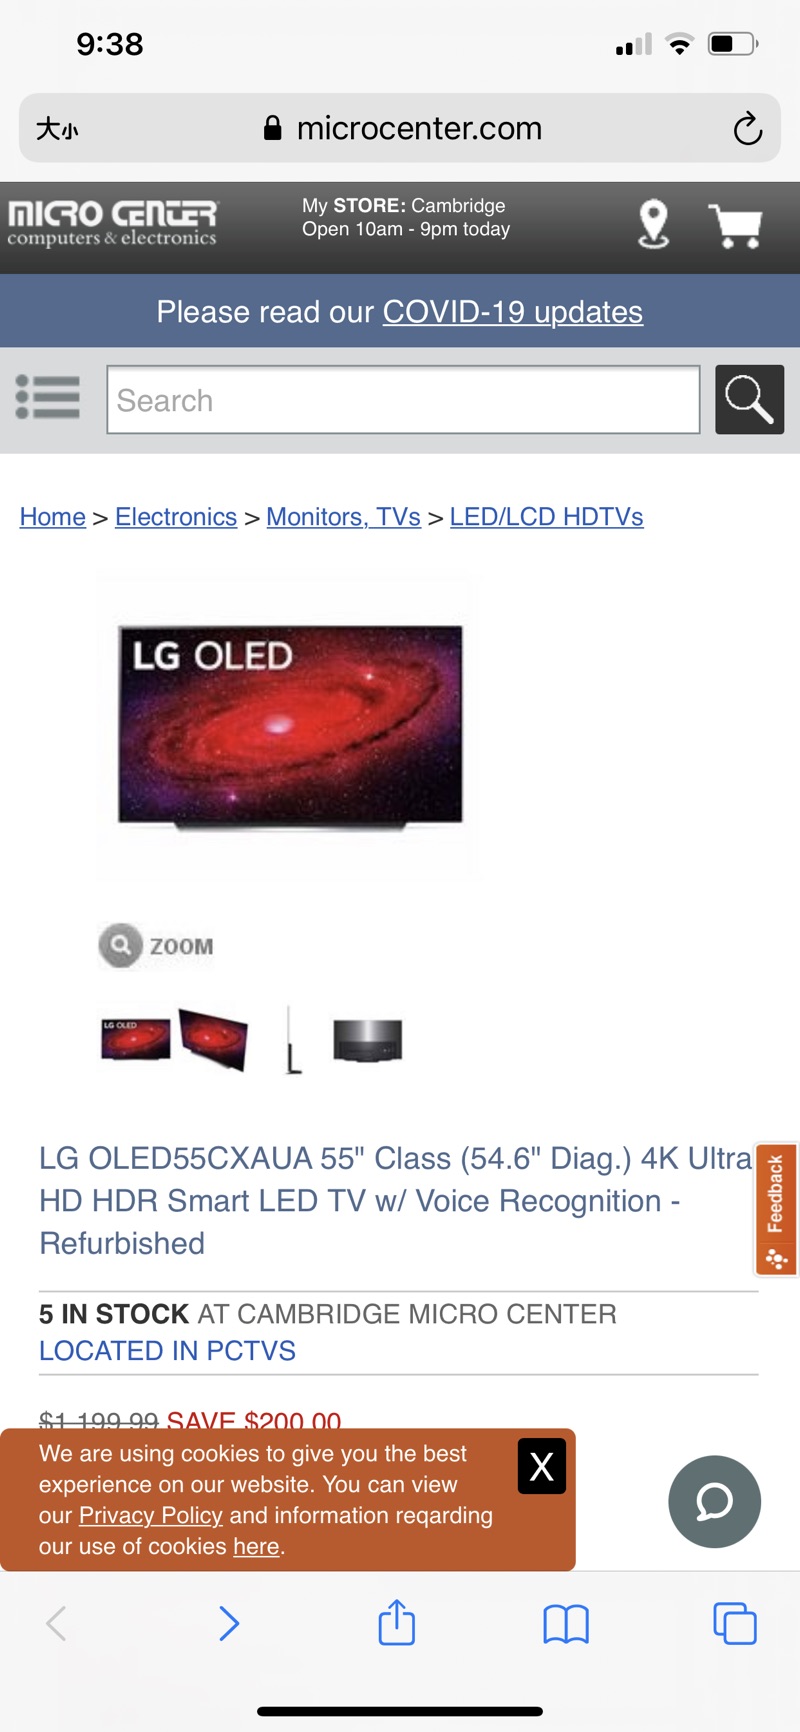 LG OLED55CXAUA 55" 电视Class (54.6" Diag.) 4K Ultra HD HDR Smart LED TV w/ Voice Recognition - Refurbished - Micro Center